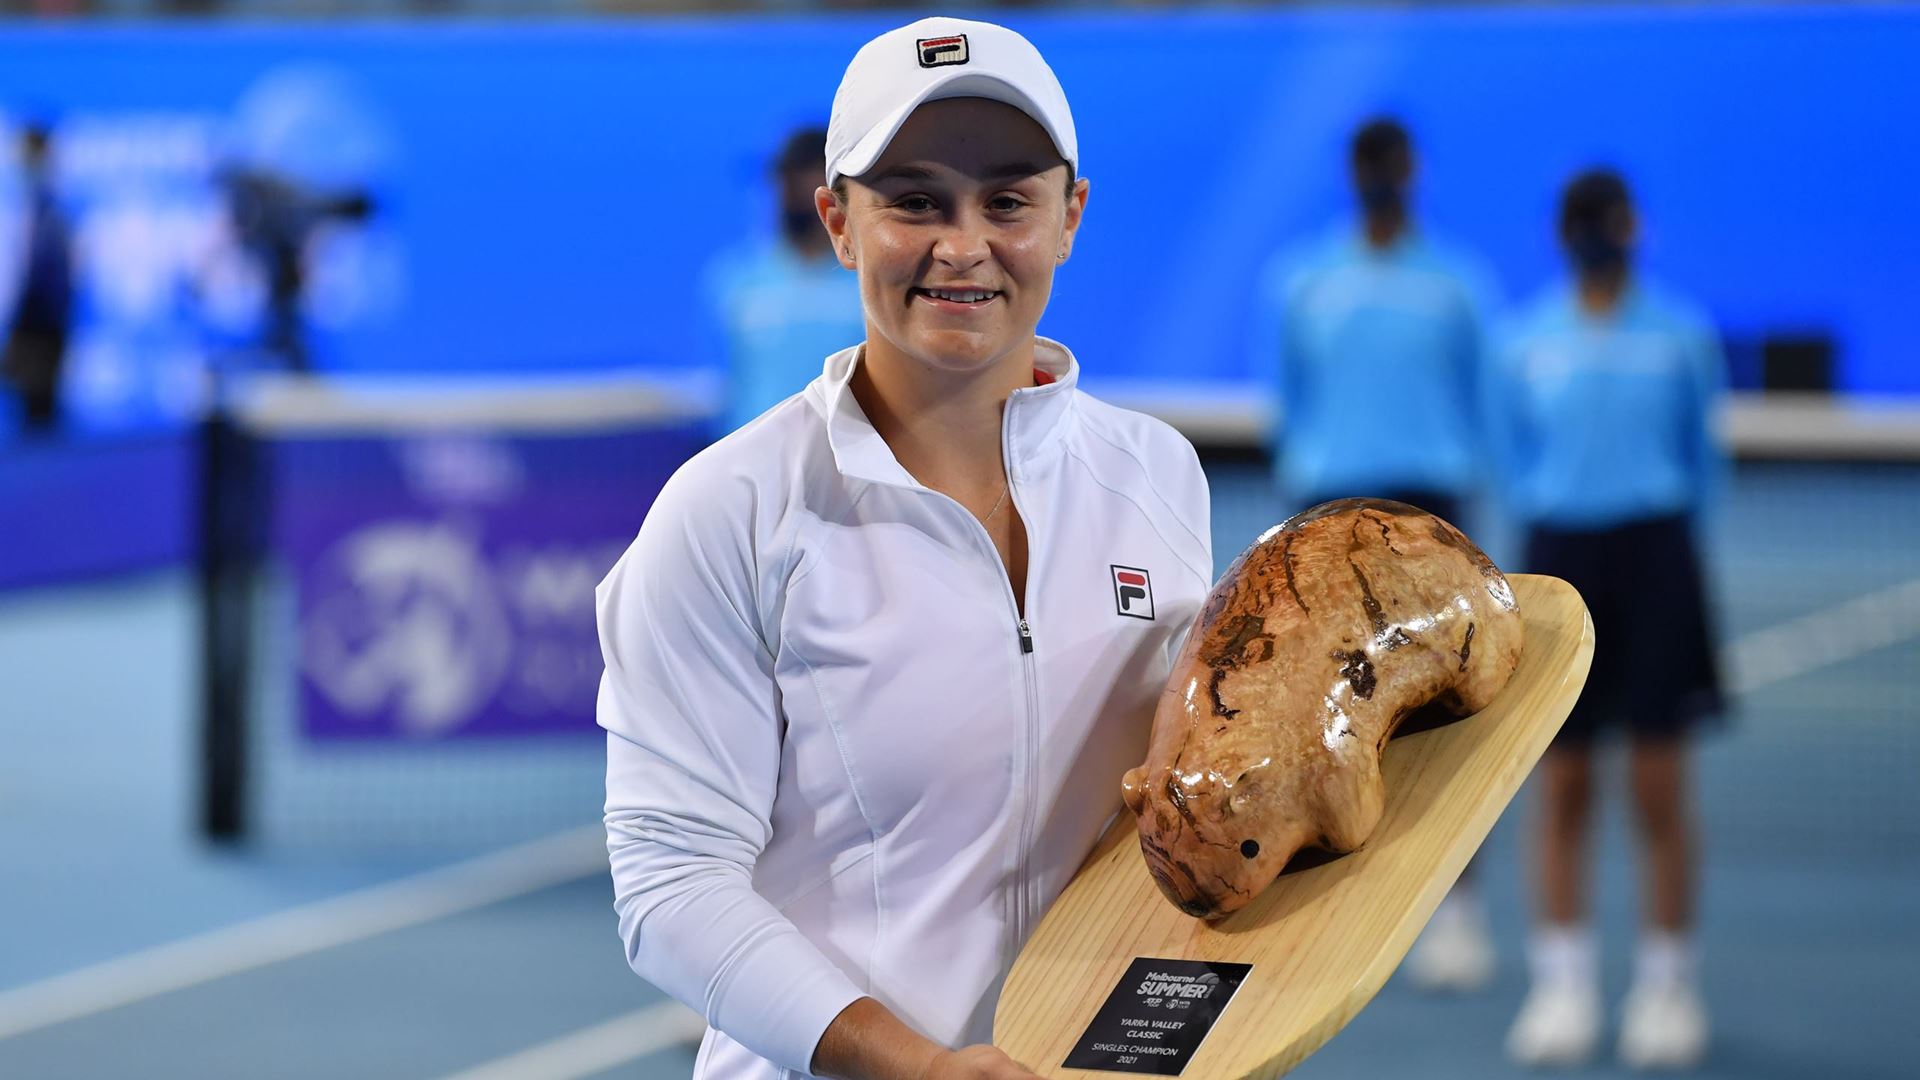 World No. 1 Ash Barty Wins Yarra Valley Classic in Triumphant Return to Tour